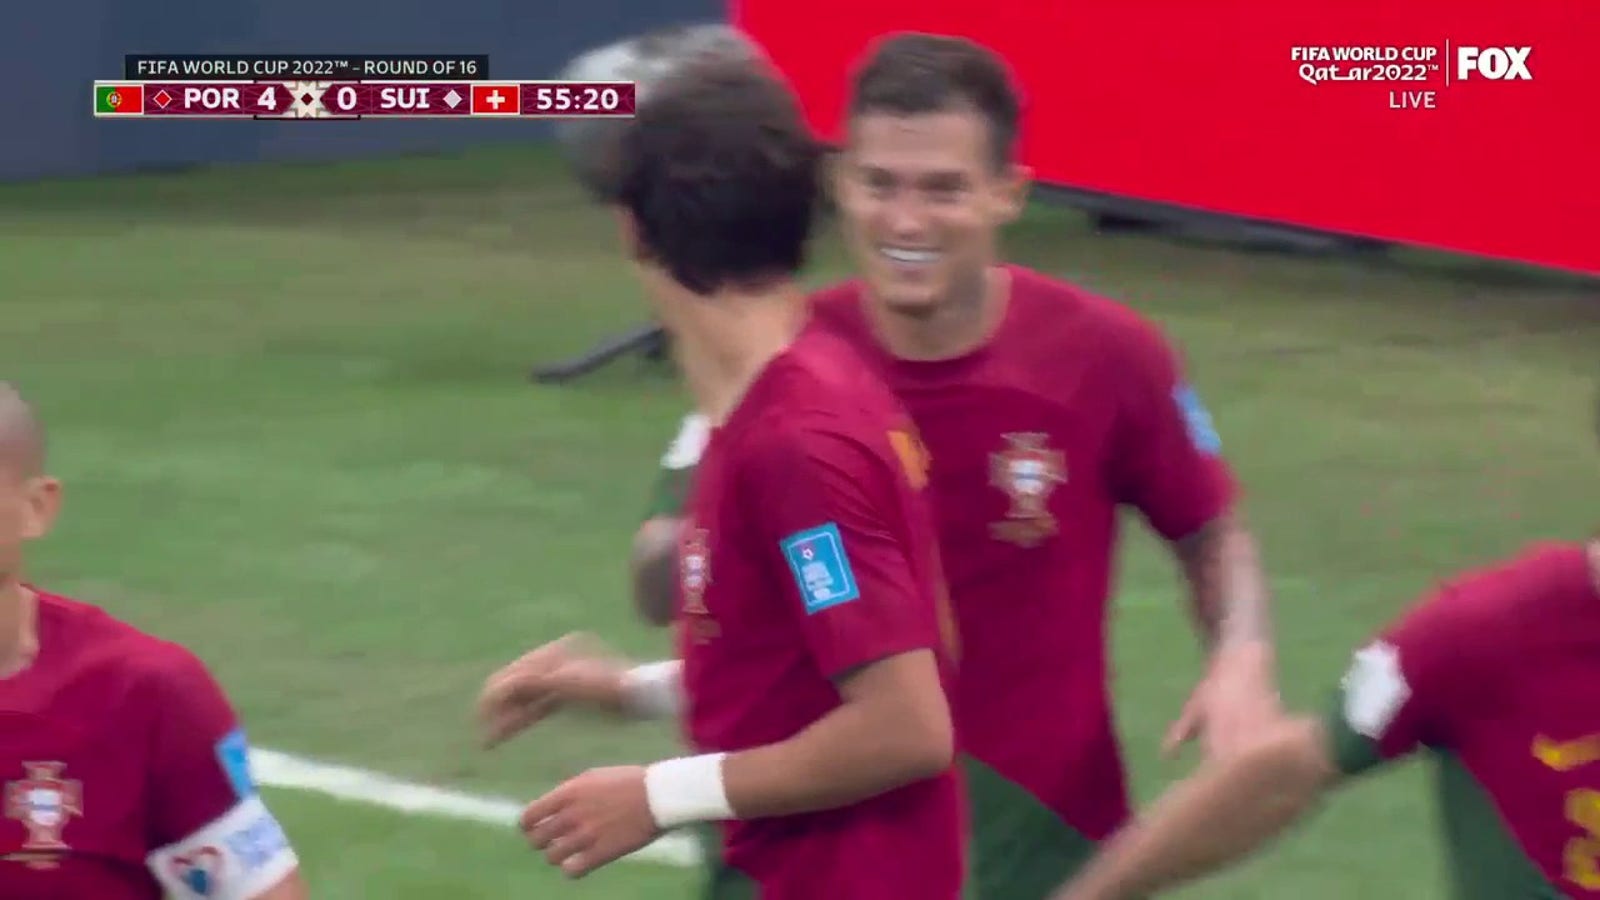 Portugal's Raphael Guerreiro scores a goal against Switzerland in the 55'